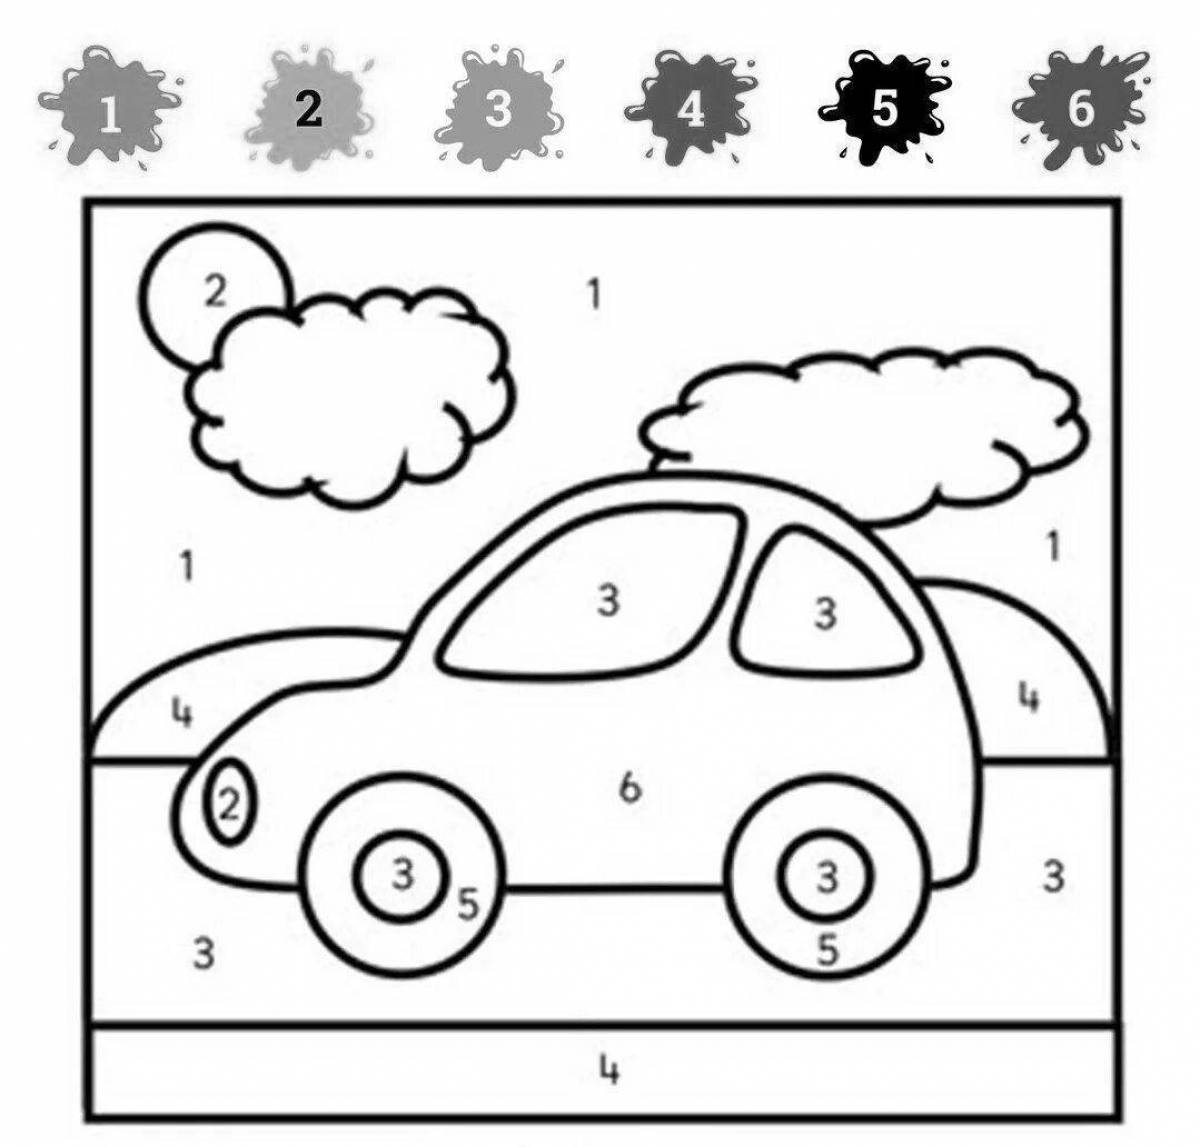 Stimulating math coloring book for 5-6 year olds